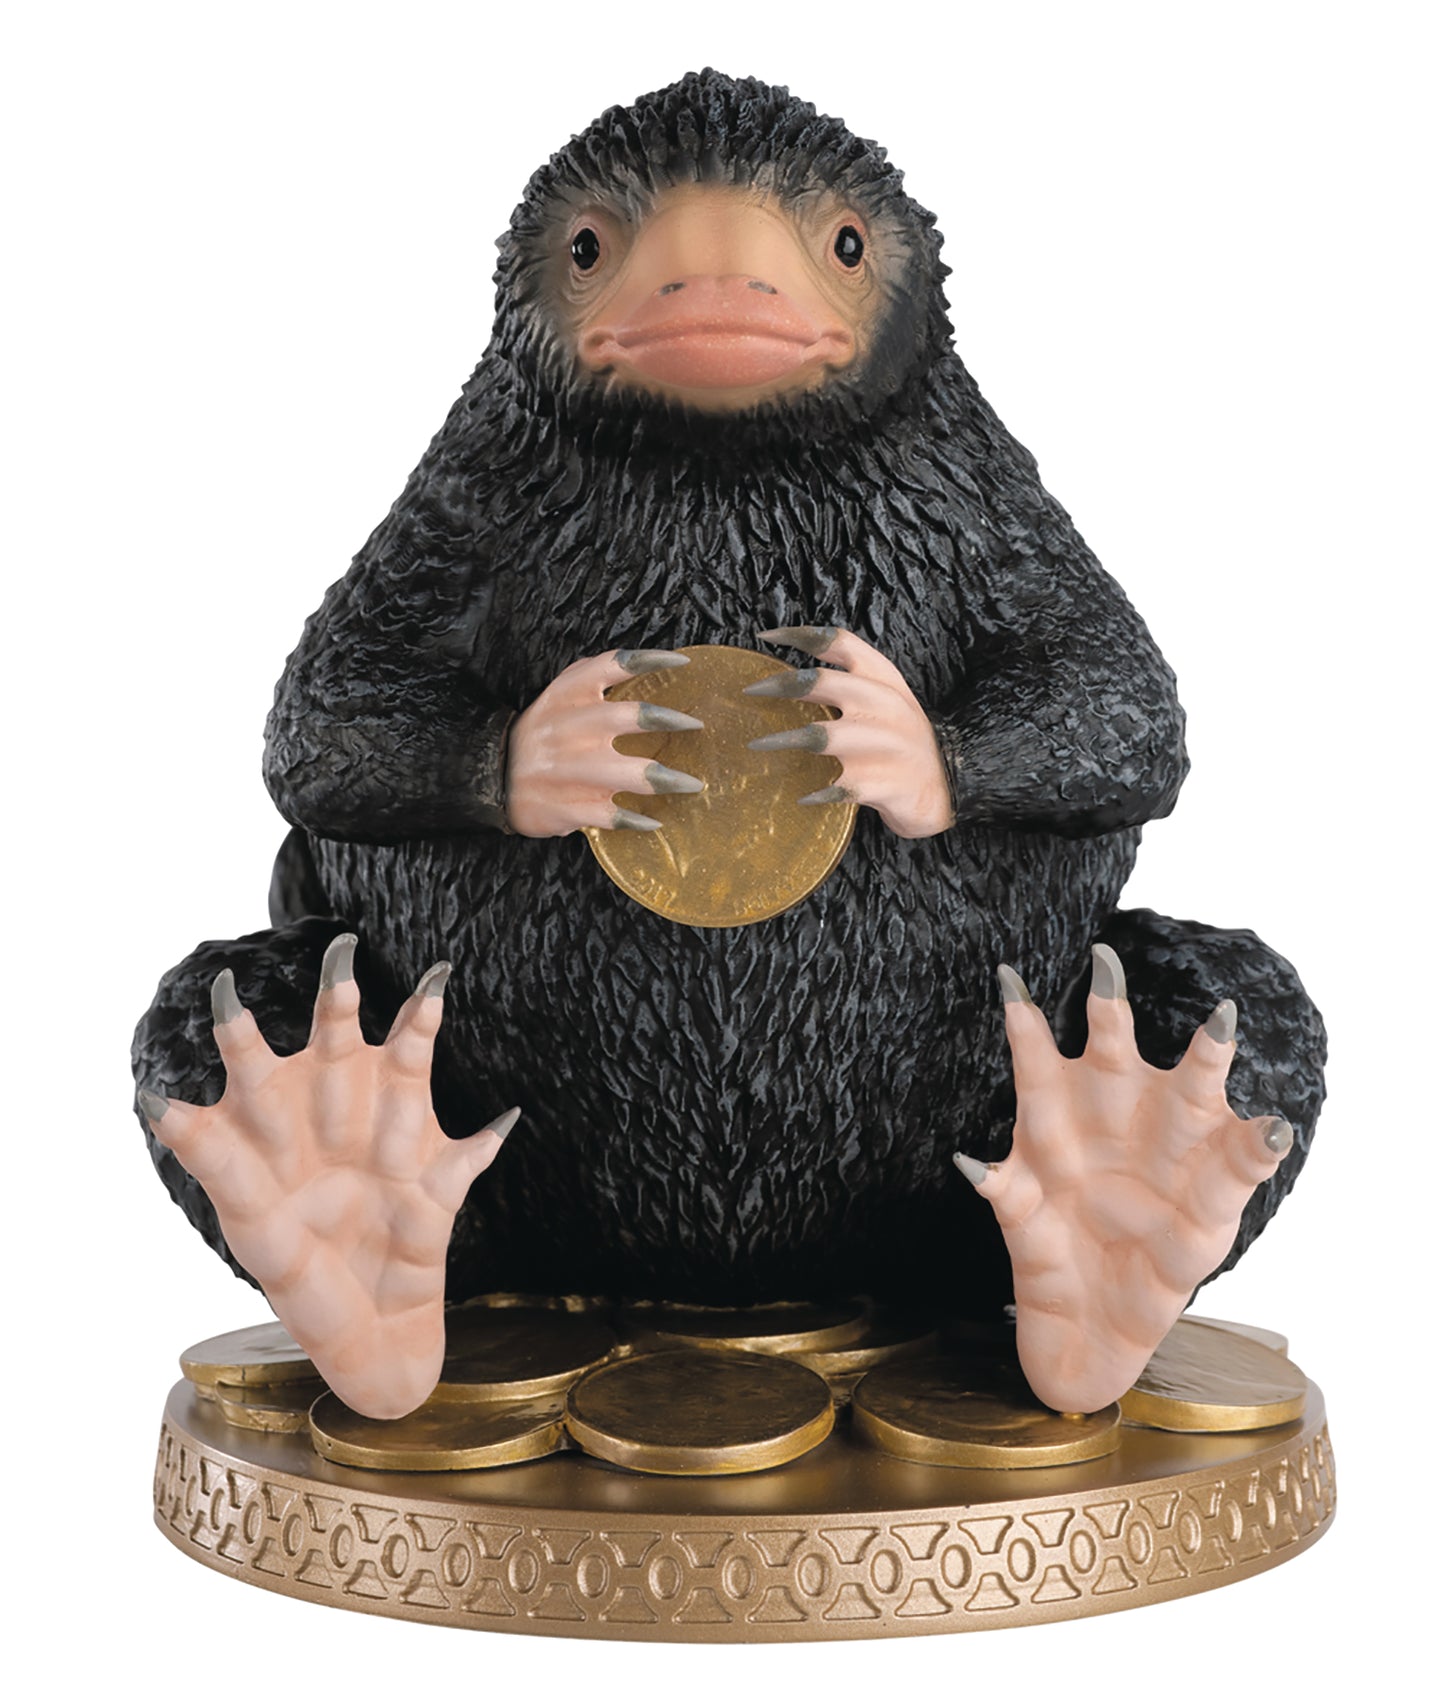 HP WIZARDING WORLD FIG COLLECTION NIFFLER